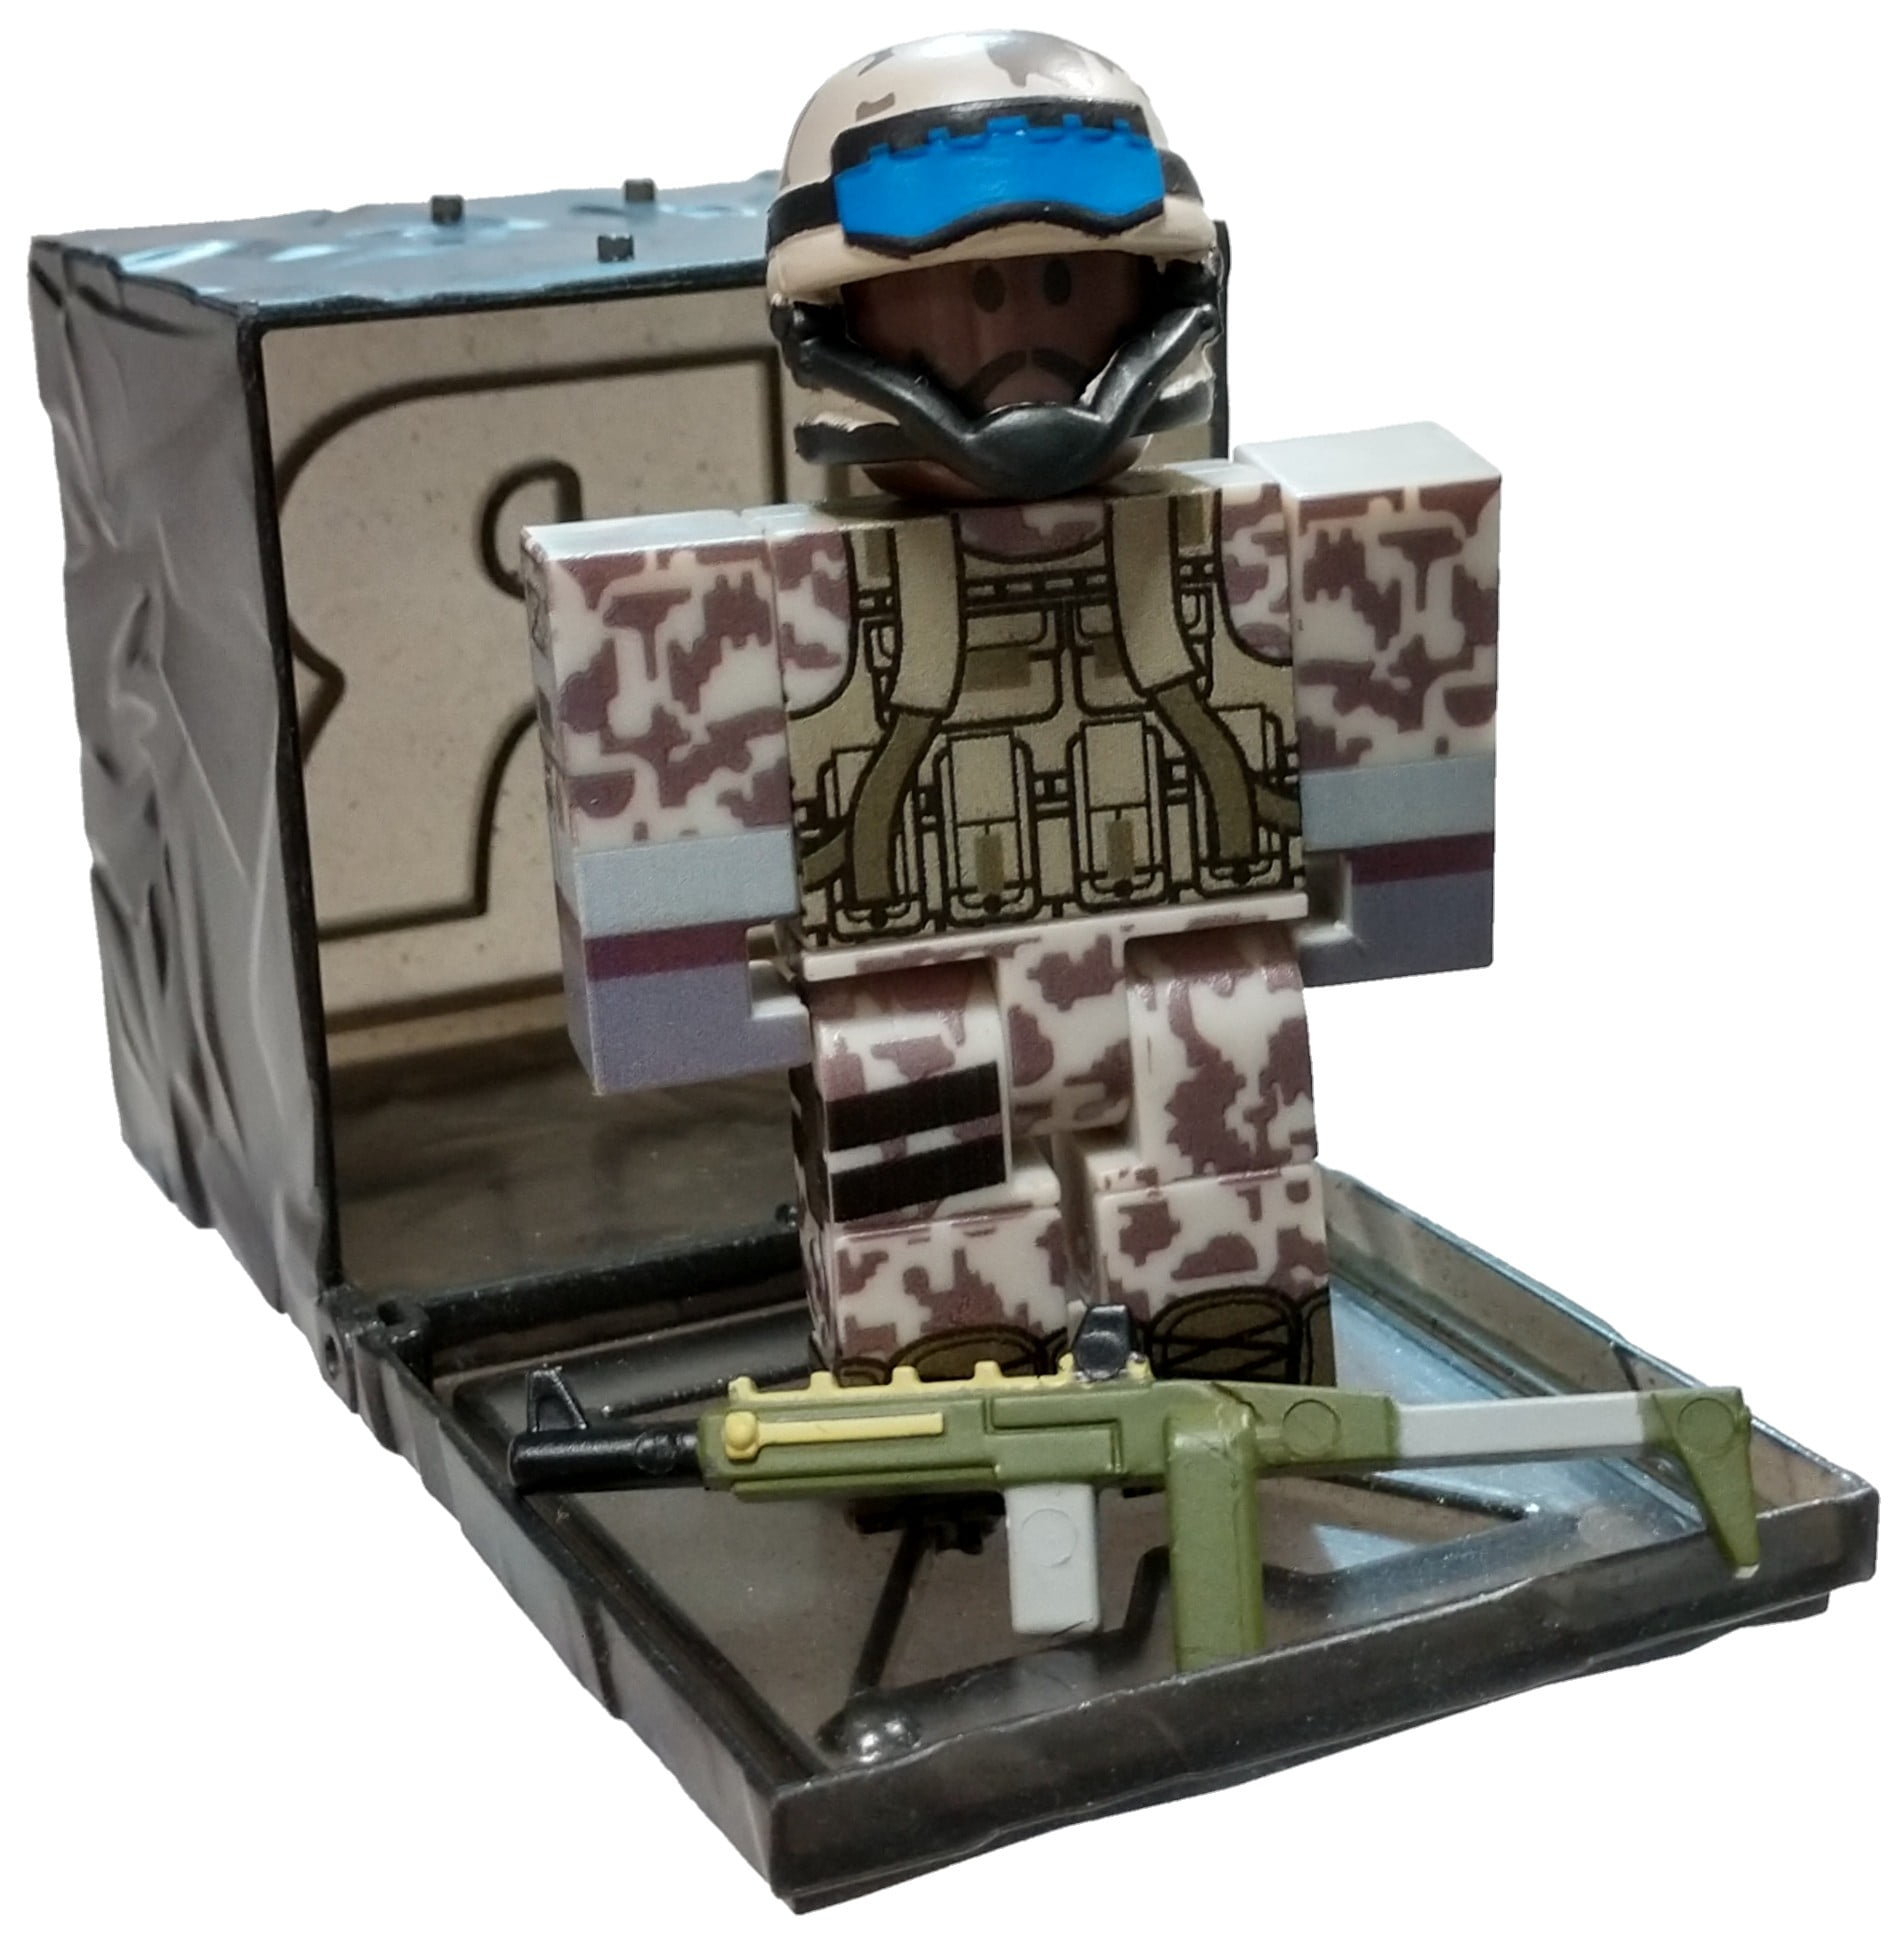 Roblox Series 7 After The Flash Uscpf Soldier Mini Figure With Black Cube And Online Code No Packaging Walmart Com Walmart Com - roblox newest after the flash game